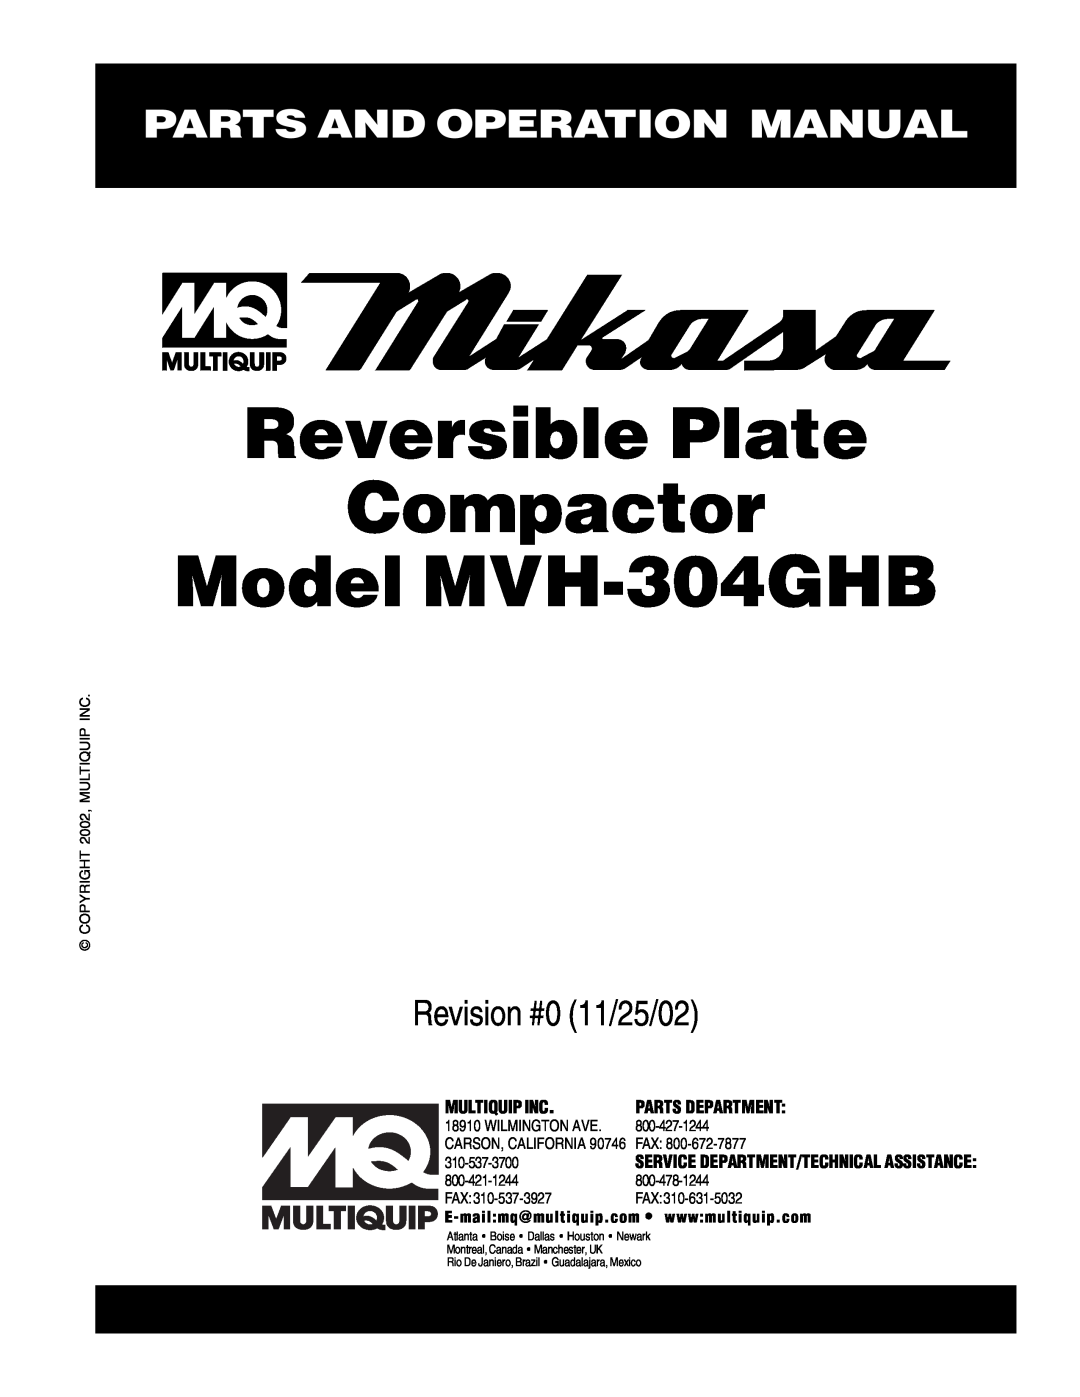 Multiquip operation manual Reversible Plate Compactor Model MVH-304GHB, Revision #0 11/25/02, Multiquip Inc 